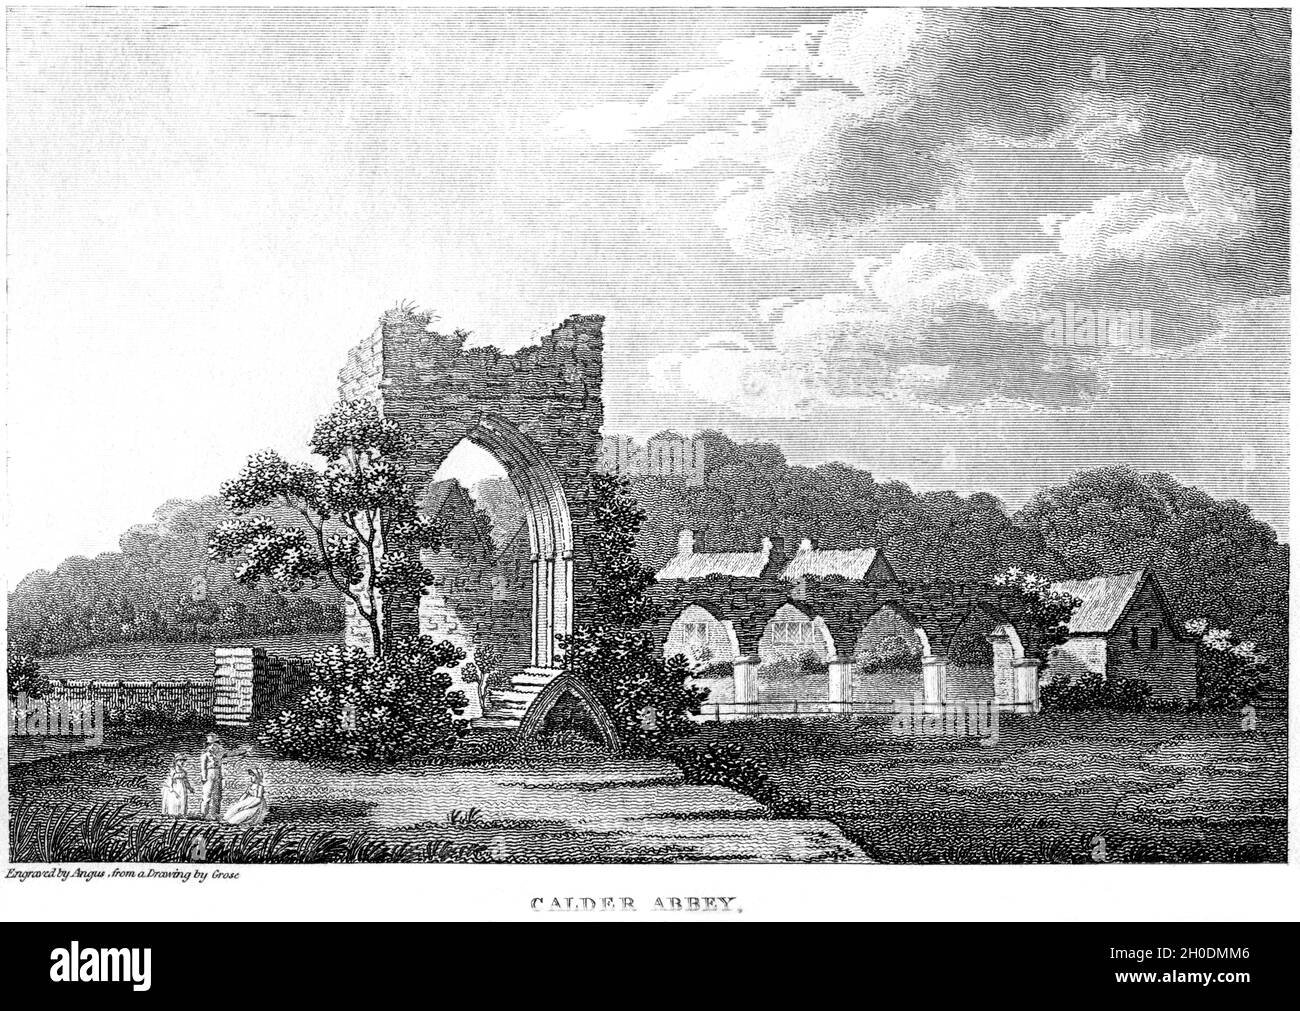 An engraving of Calder Abbey, Cumberland UK scanned at high resolution from a book printed in 1812. This image is believed to be copyright free. Stock Photo